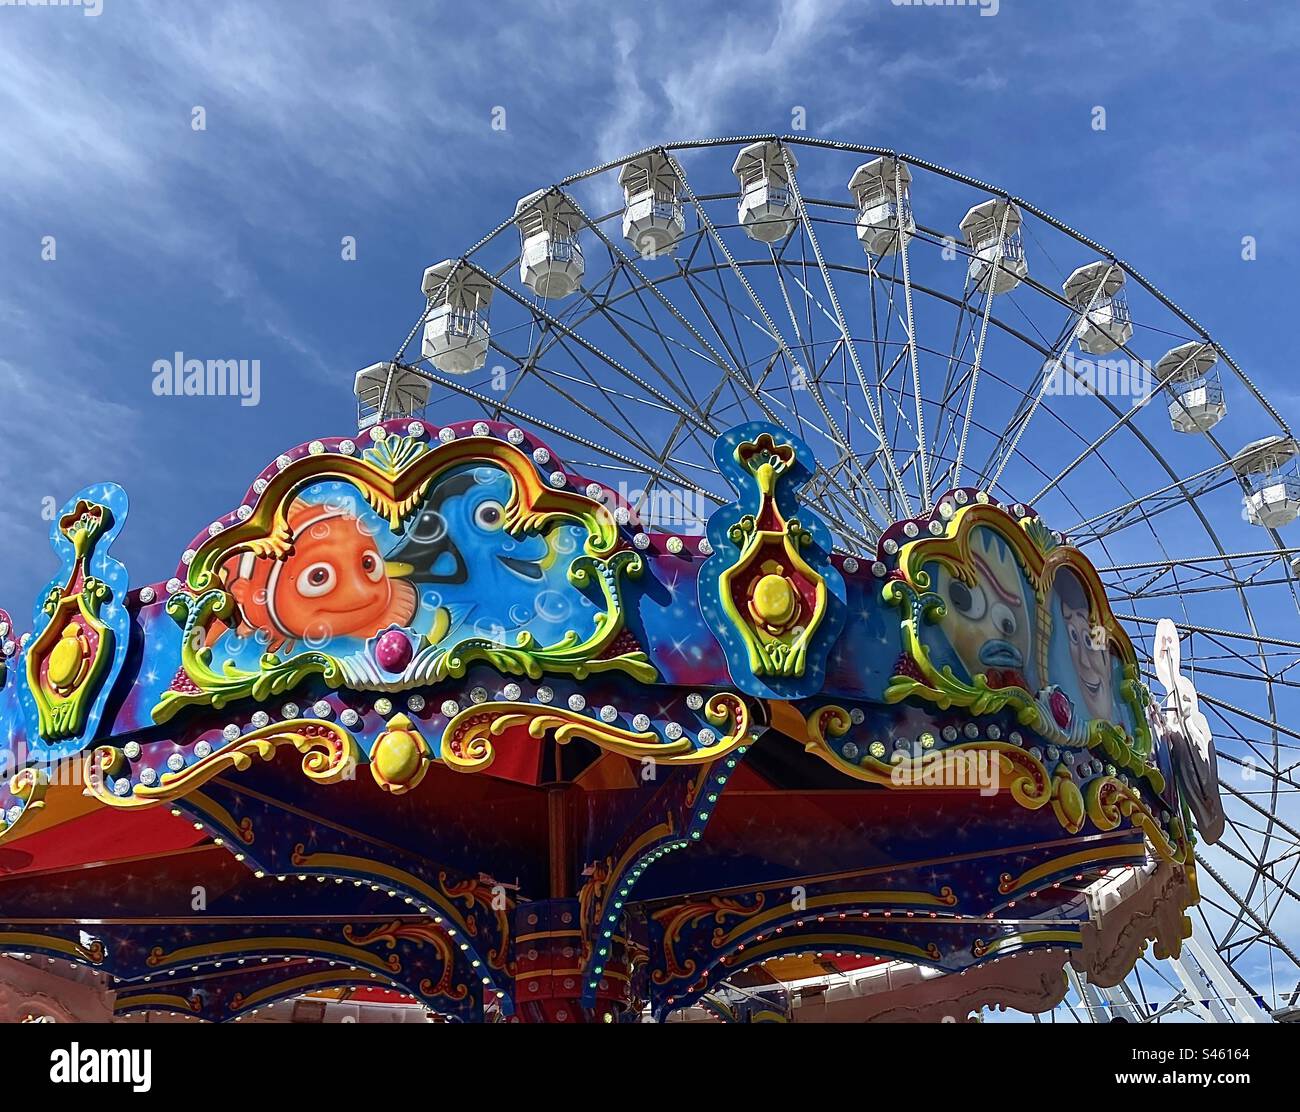 The decorative colour and shapes on the top of the children’s roundabout contrast with the simple white of the Big Wheel at Bangor, Northern Ireland. Many children’s activities surround the marina. Stock Photo